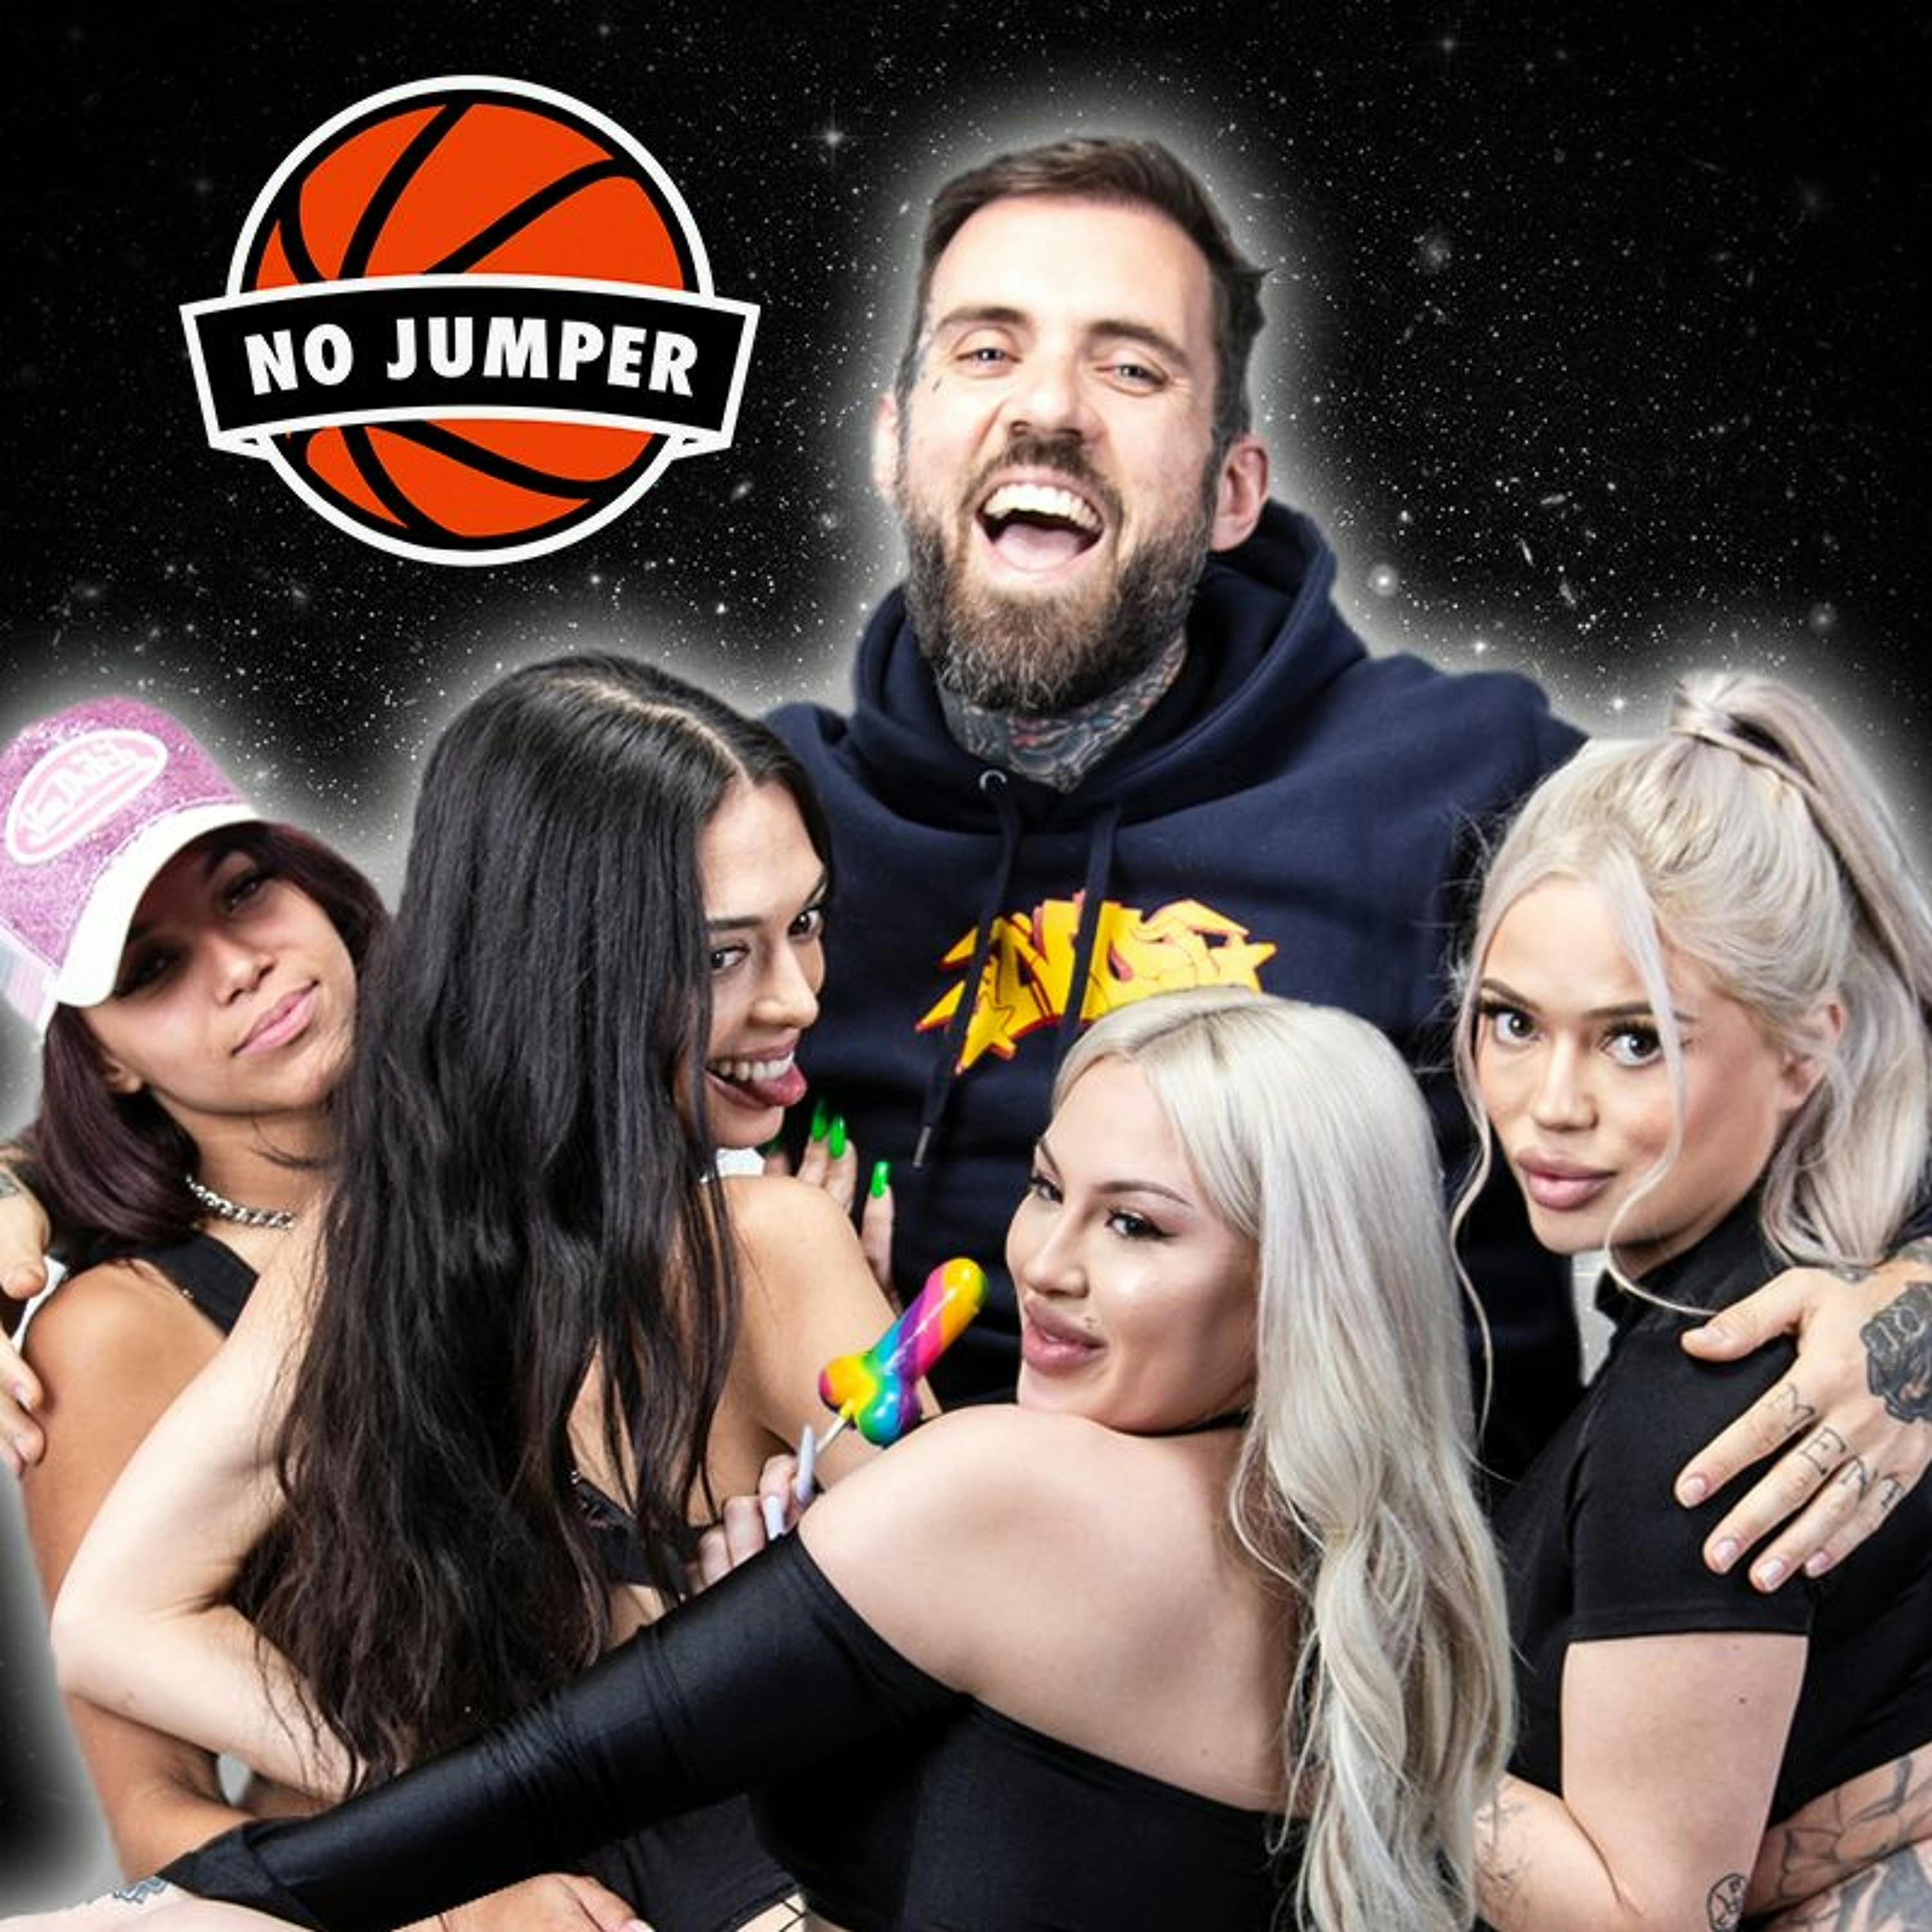 No jumper patreon podcast free